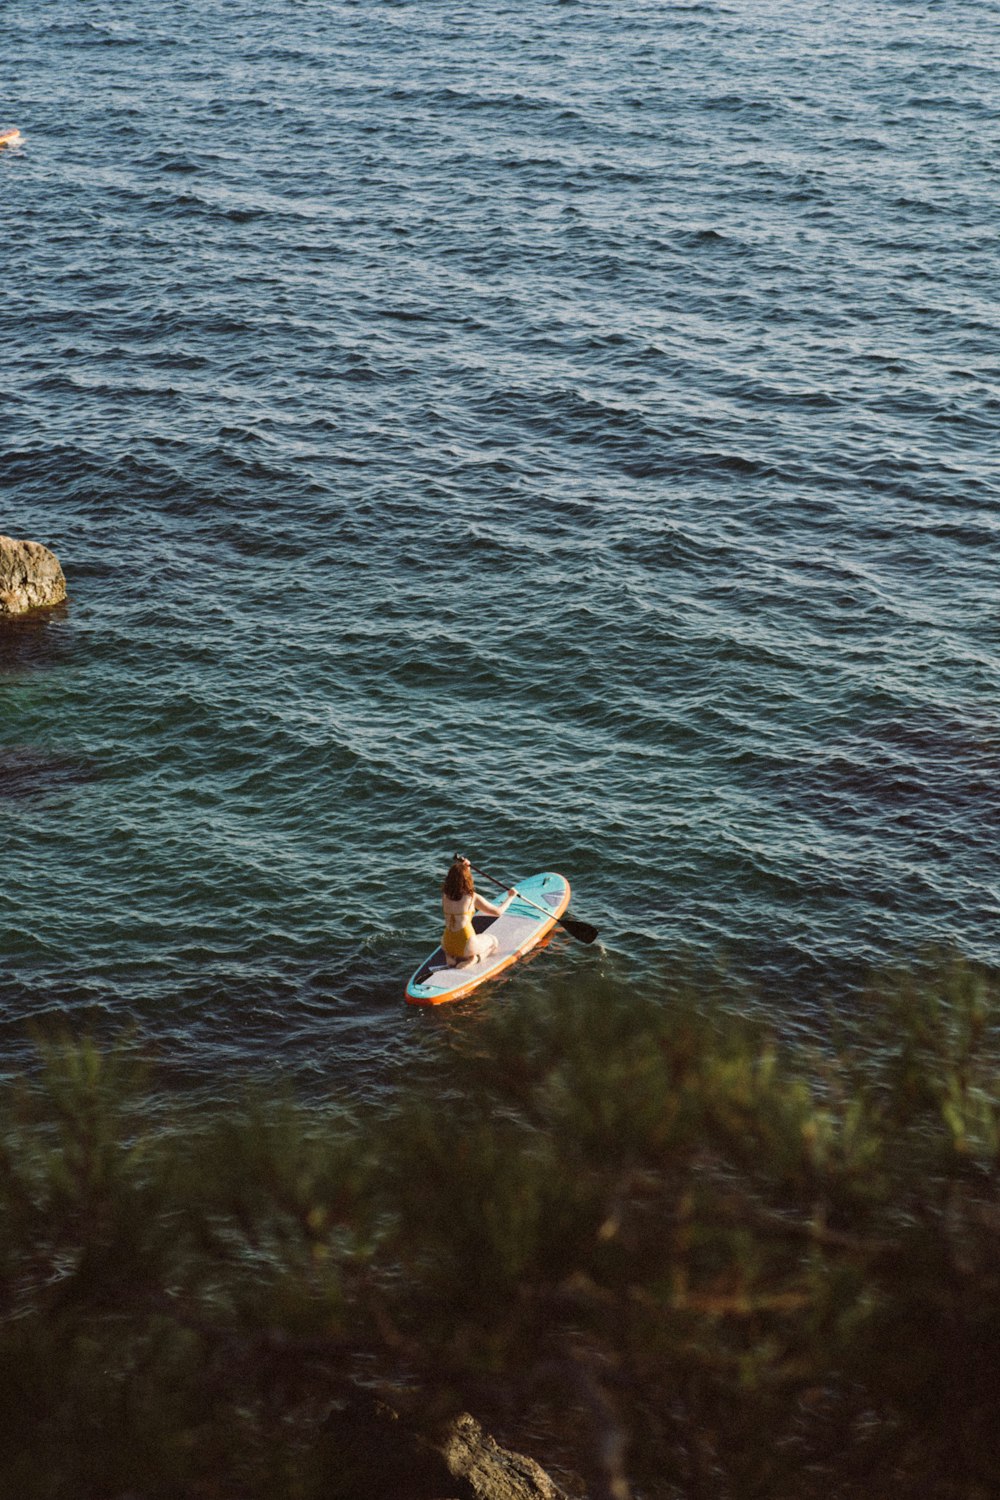 woman in yellow and white dress lying on brown surfboard on body of water during daytime